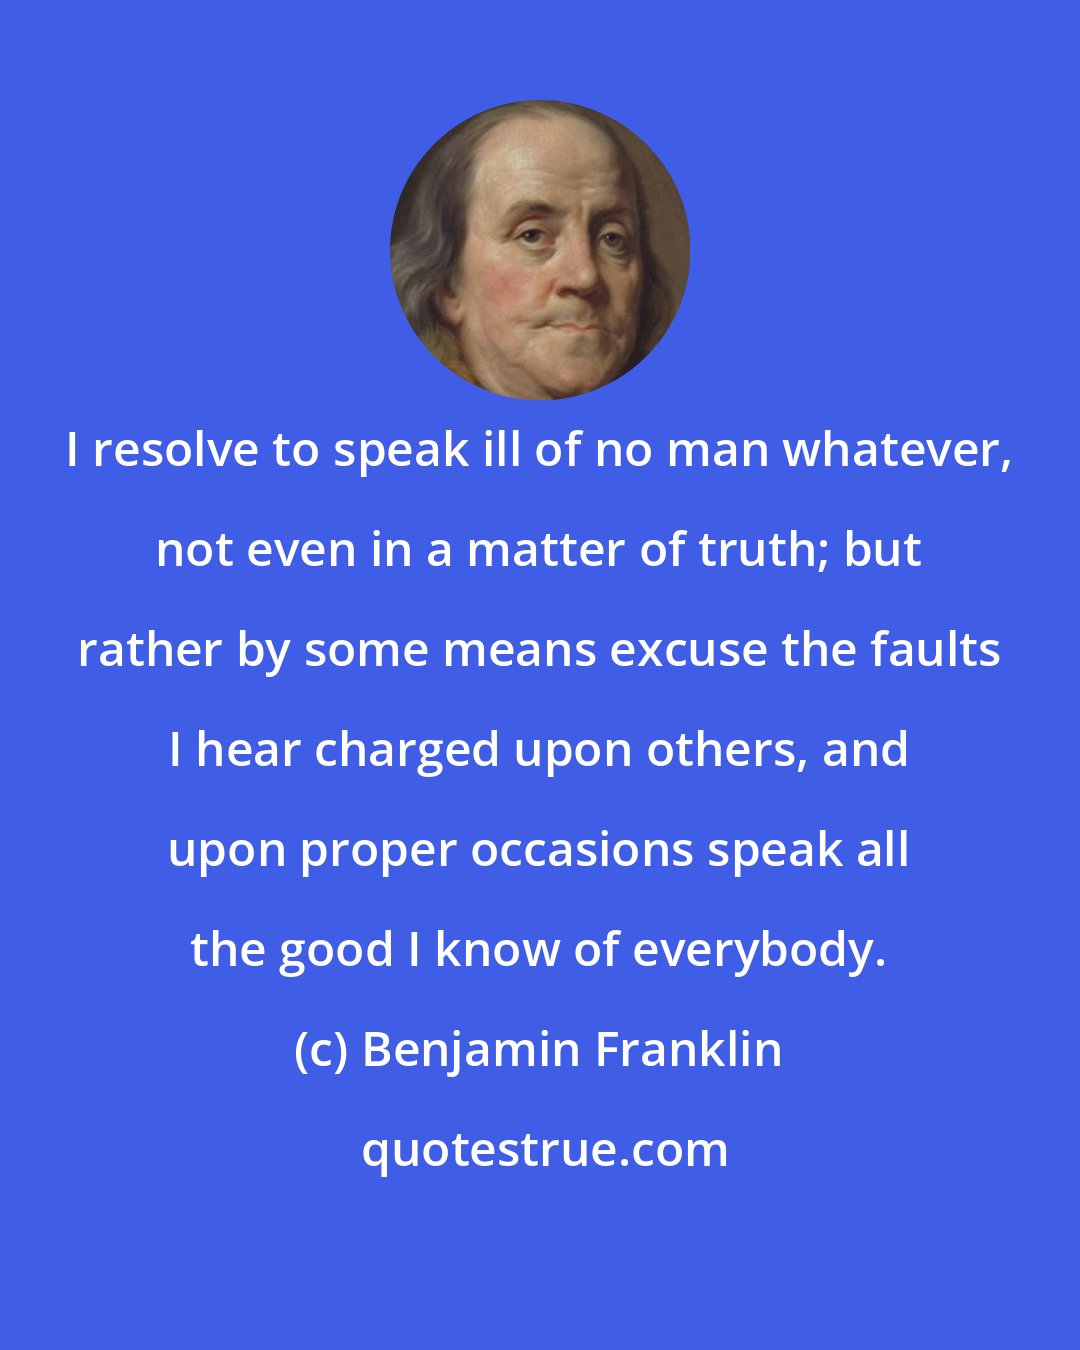 Benjamin Franklin: I resolve to speak ill of no man whatever, not even in a matter of truth; but rather by some means excuse the faults I hear charged upon others, and upon proper occasions speak all the good I know of everybody.